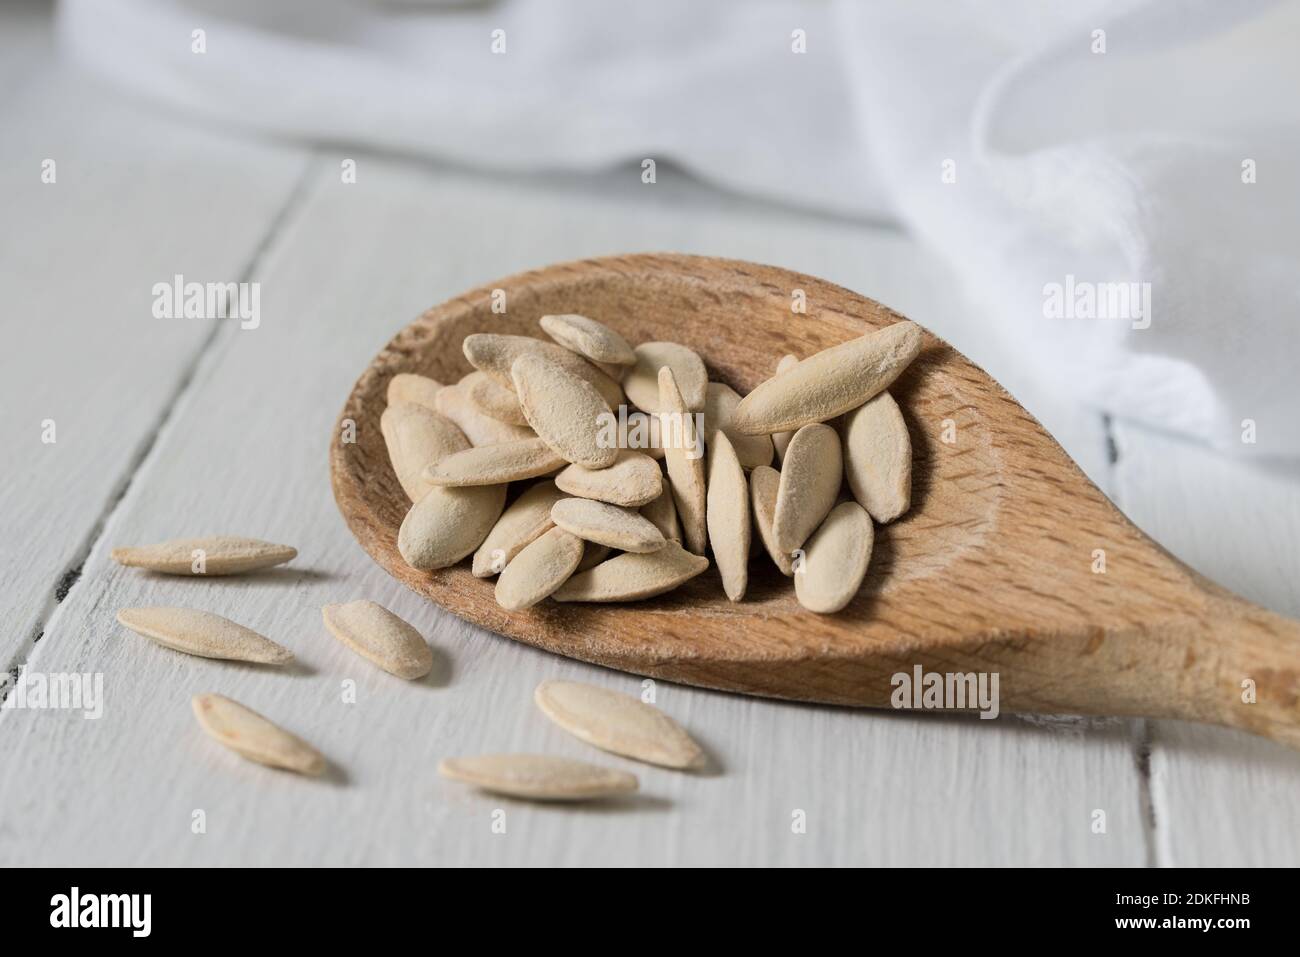 Close-up Of Pumpkin Seeds With Wooden Spoon On Table Stock Photo